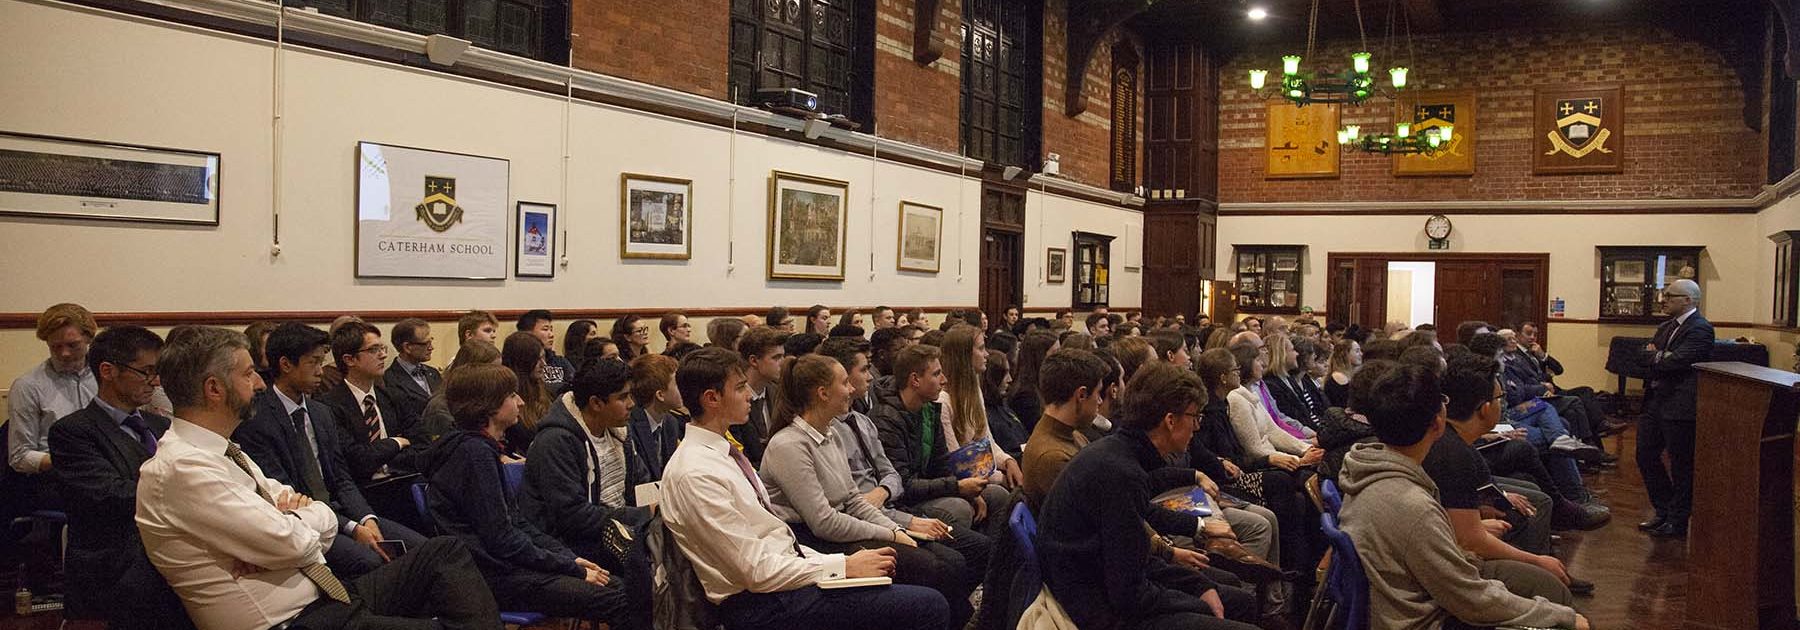 Moncrieff Jones: Annual Science Lecture